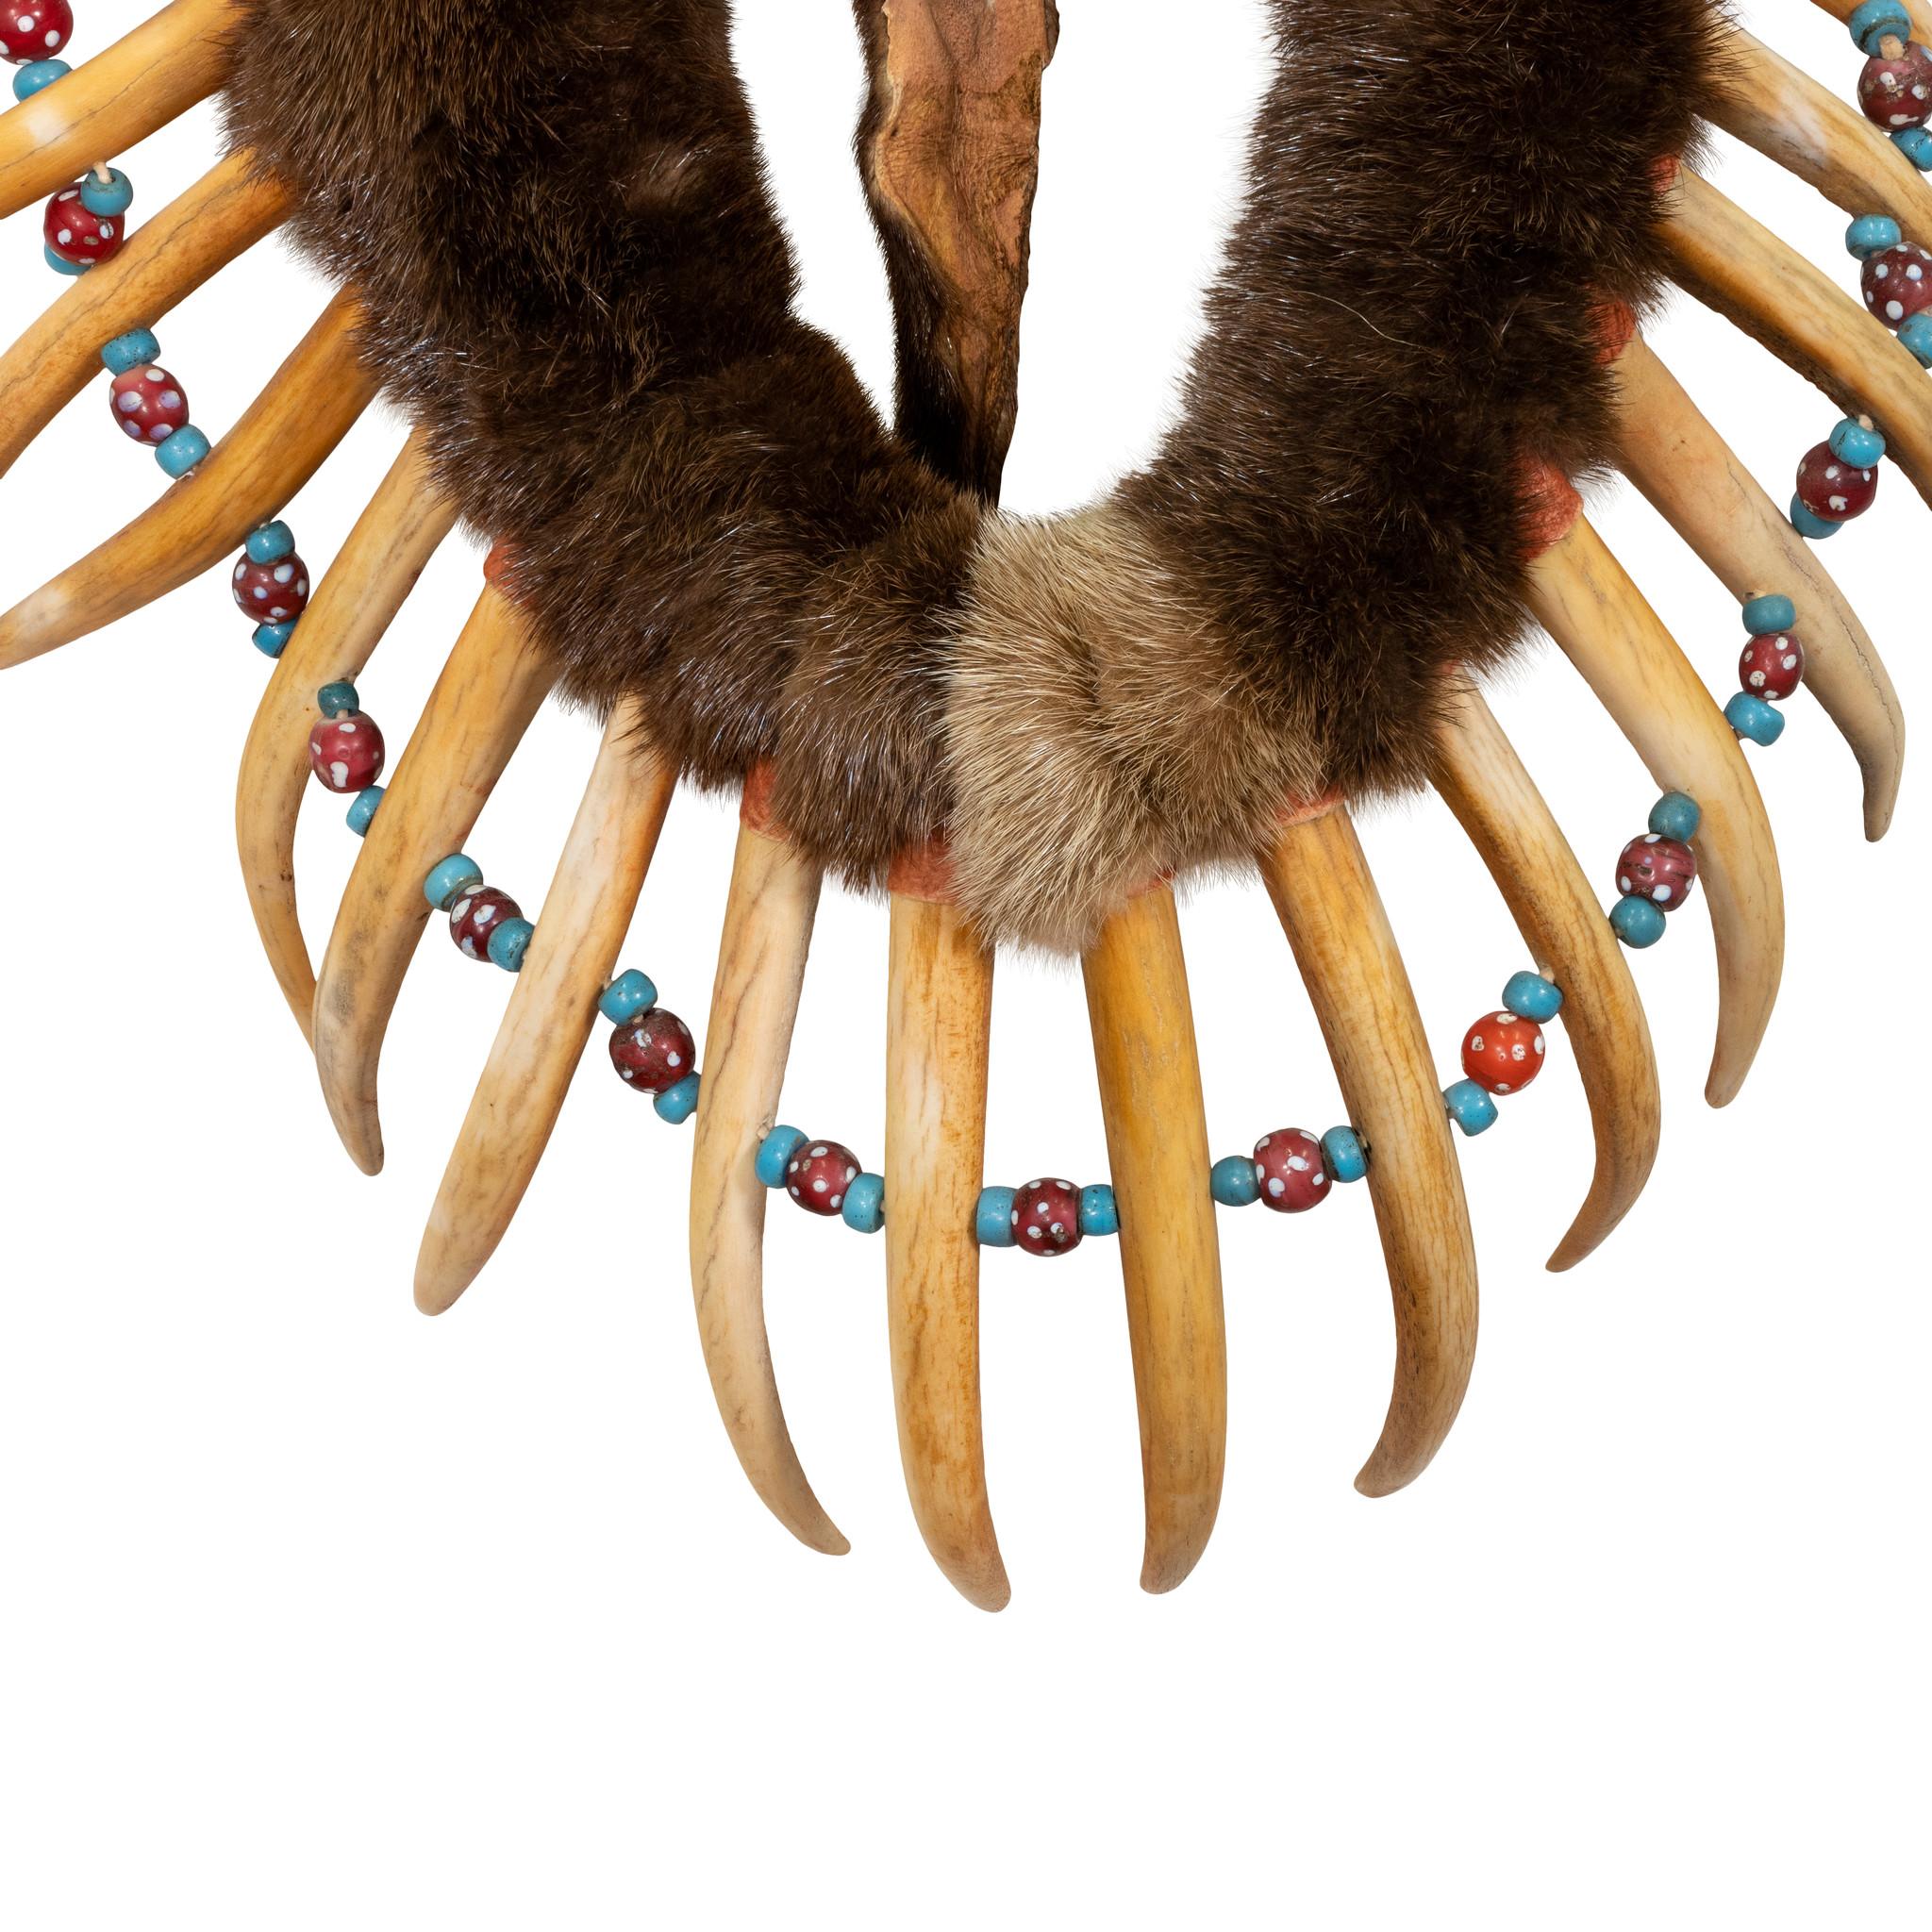 Central plains warrior's otter skin breastplate/necklace with hand carved and painted deer antlers simulating grizzly claws. Venetian beads strung in between. Ex. Private museum

Period: Last half 20th Century
Origin: Central Plains
Size: Antlers 7